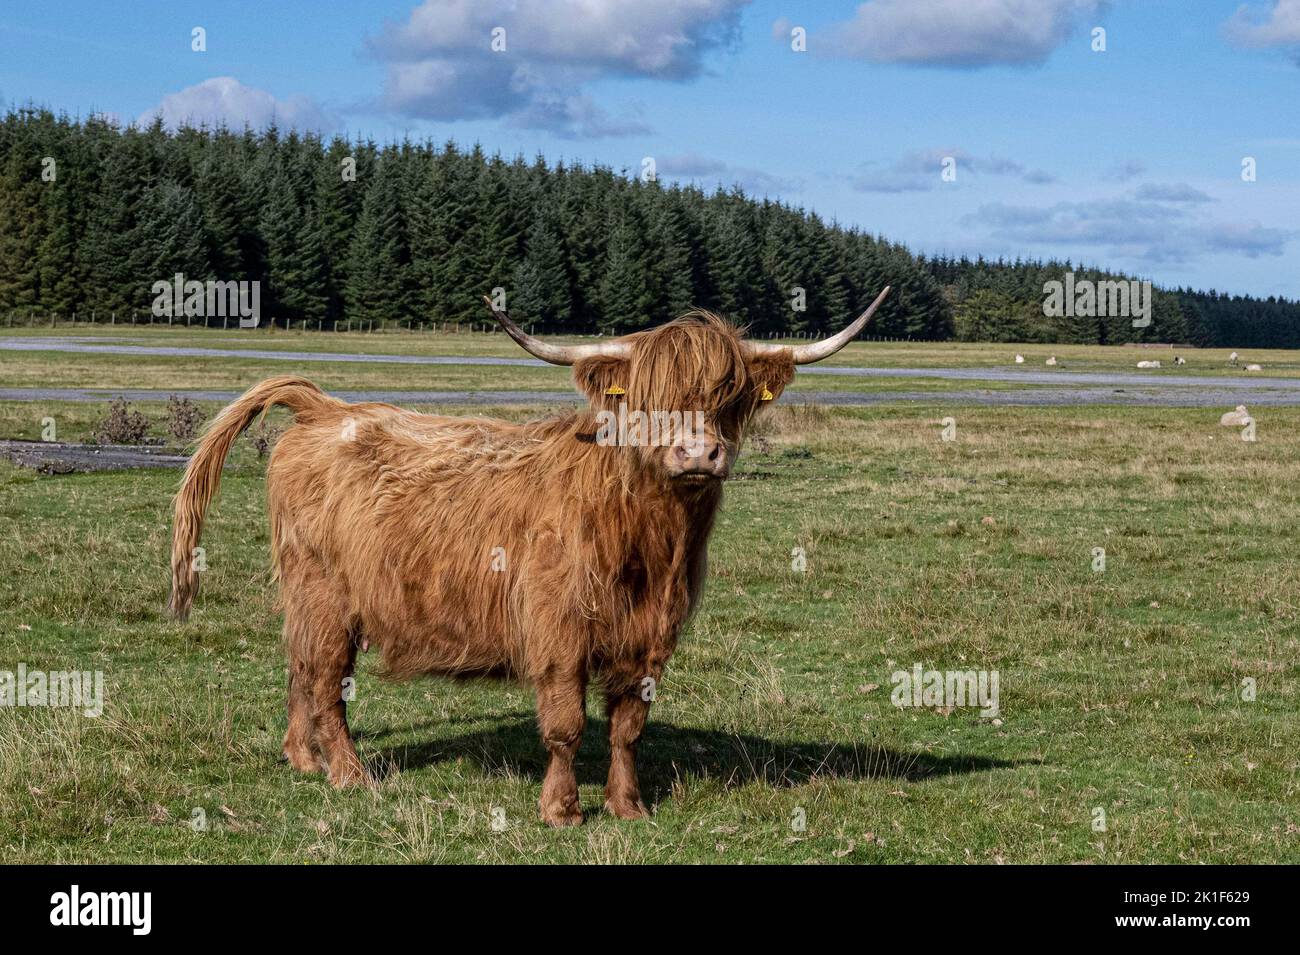 The Highland is a Scottish breed of rustic cattle. It originated in the Scottish Highlands and the Outer Hebrides islands of Scotland Stock Photo